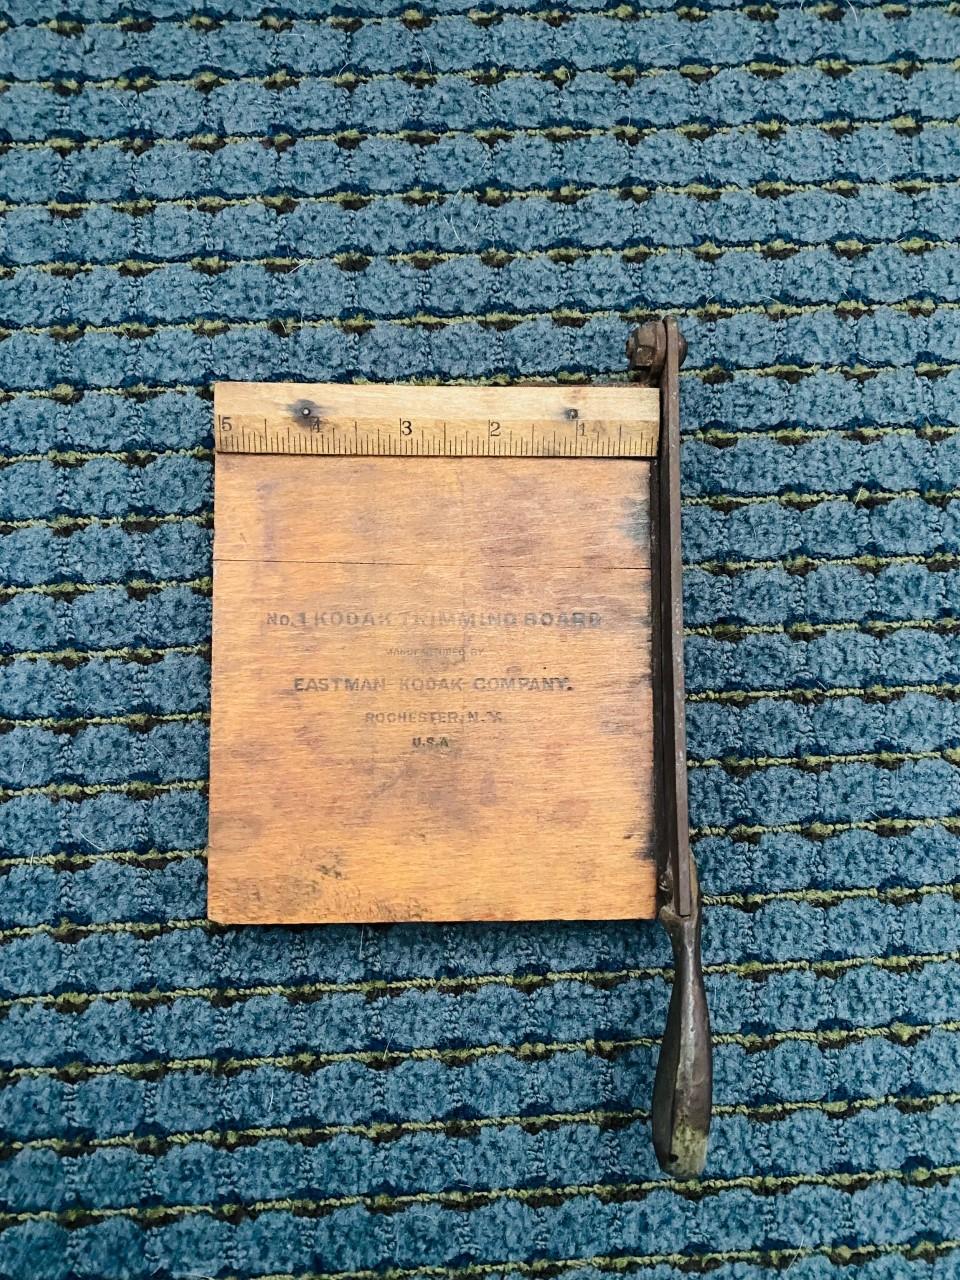 Antique vintage kodak wooden trimming board by Eastman. The wooden cutting surface measures 6 inches tall by 5 inches wide by 3/4 inches tall. Some of the original writing can be seen on the surface of the board and the ruler on the top is visible.